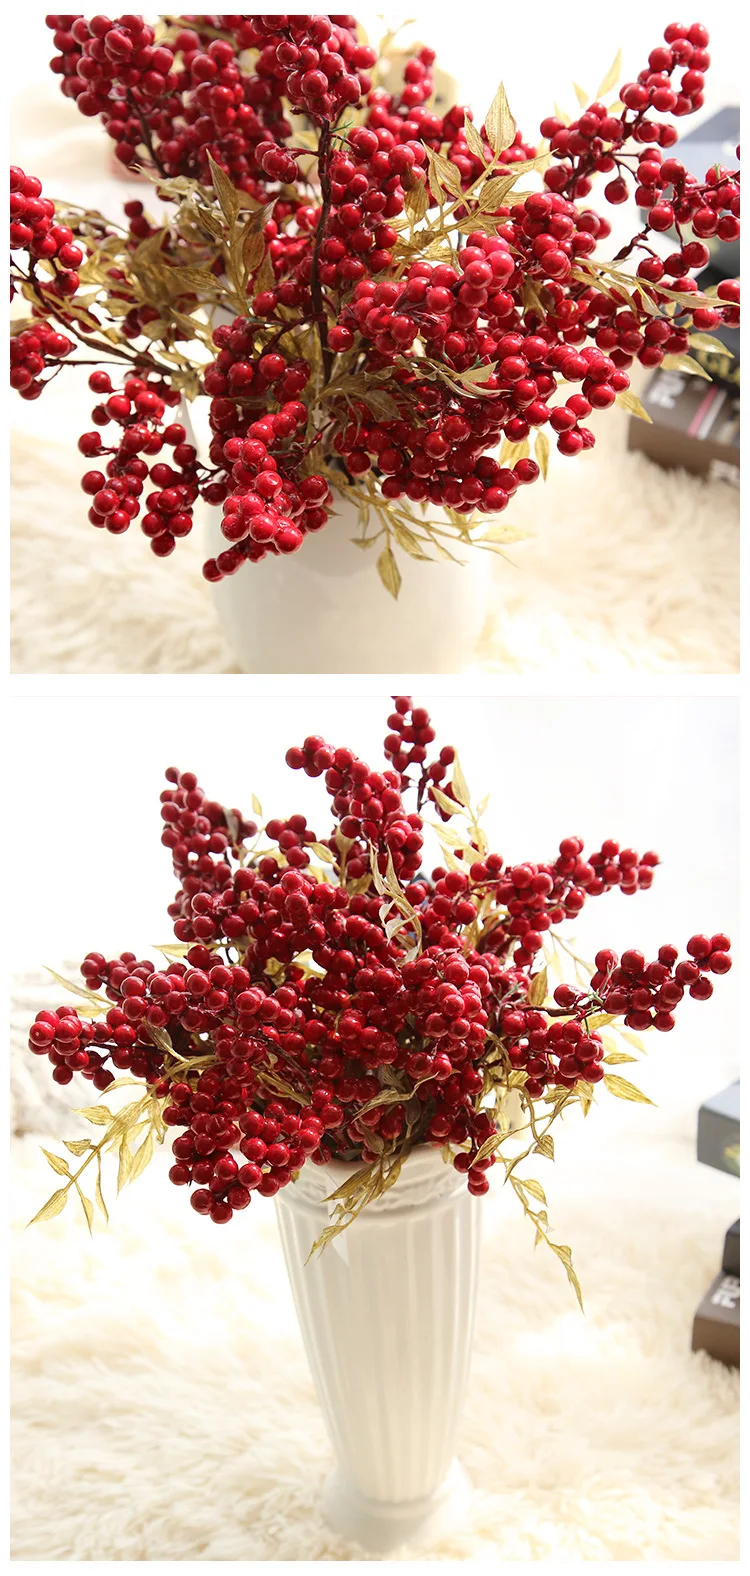 1PC 39CM Christmas Red Berries Simulation Red Fruit Berry Artificial Flower Branch For Christmas Tree Decoration New Year Decor